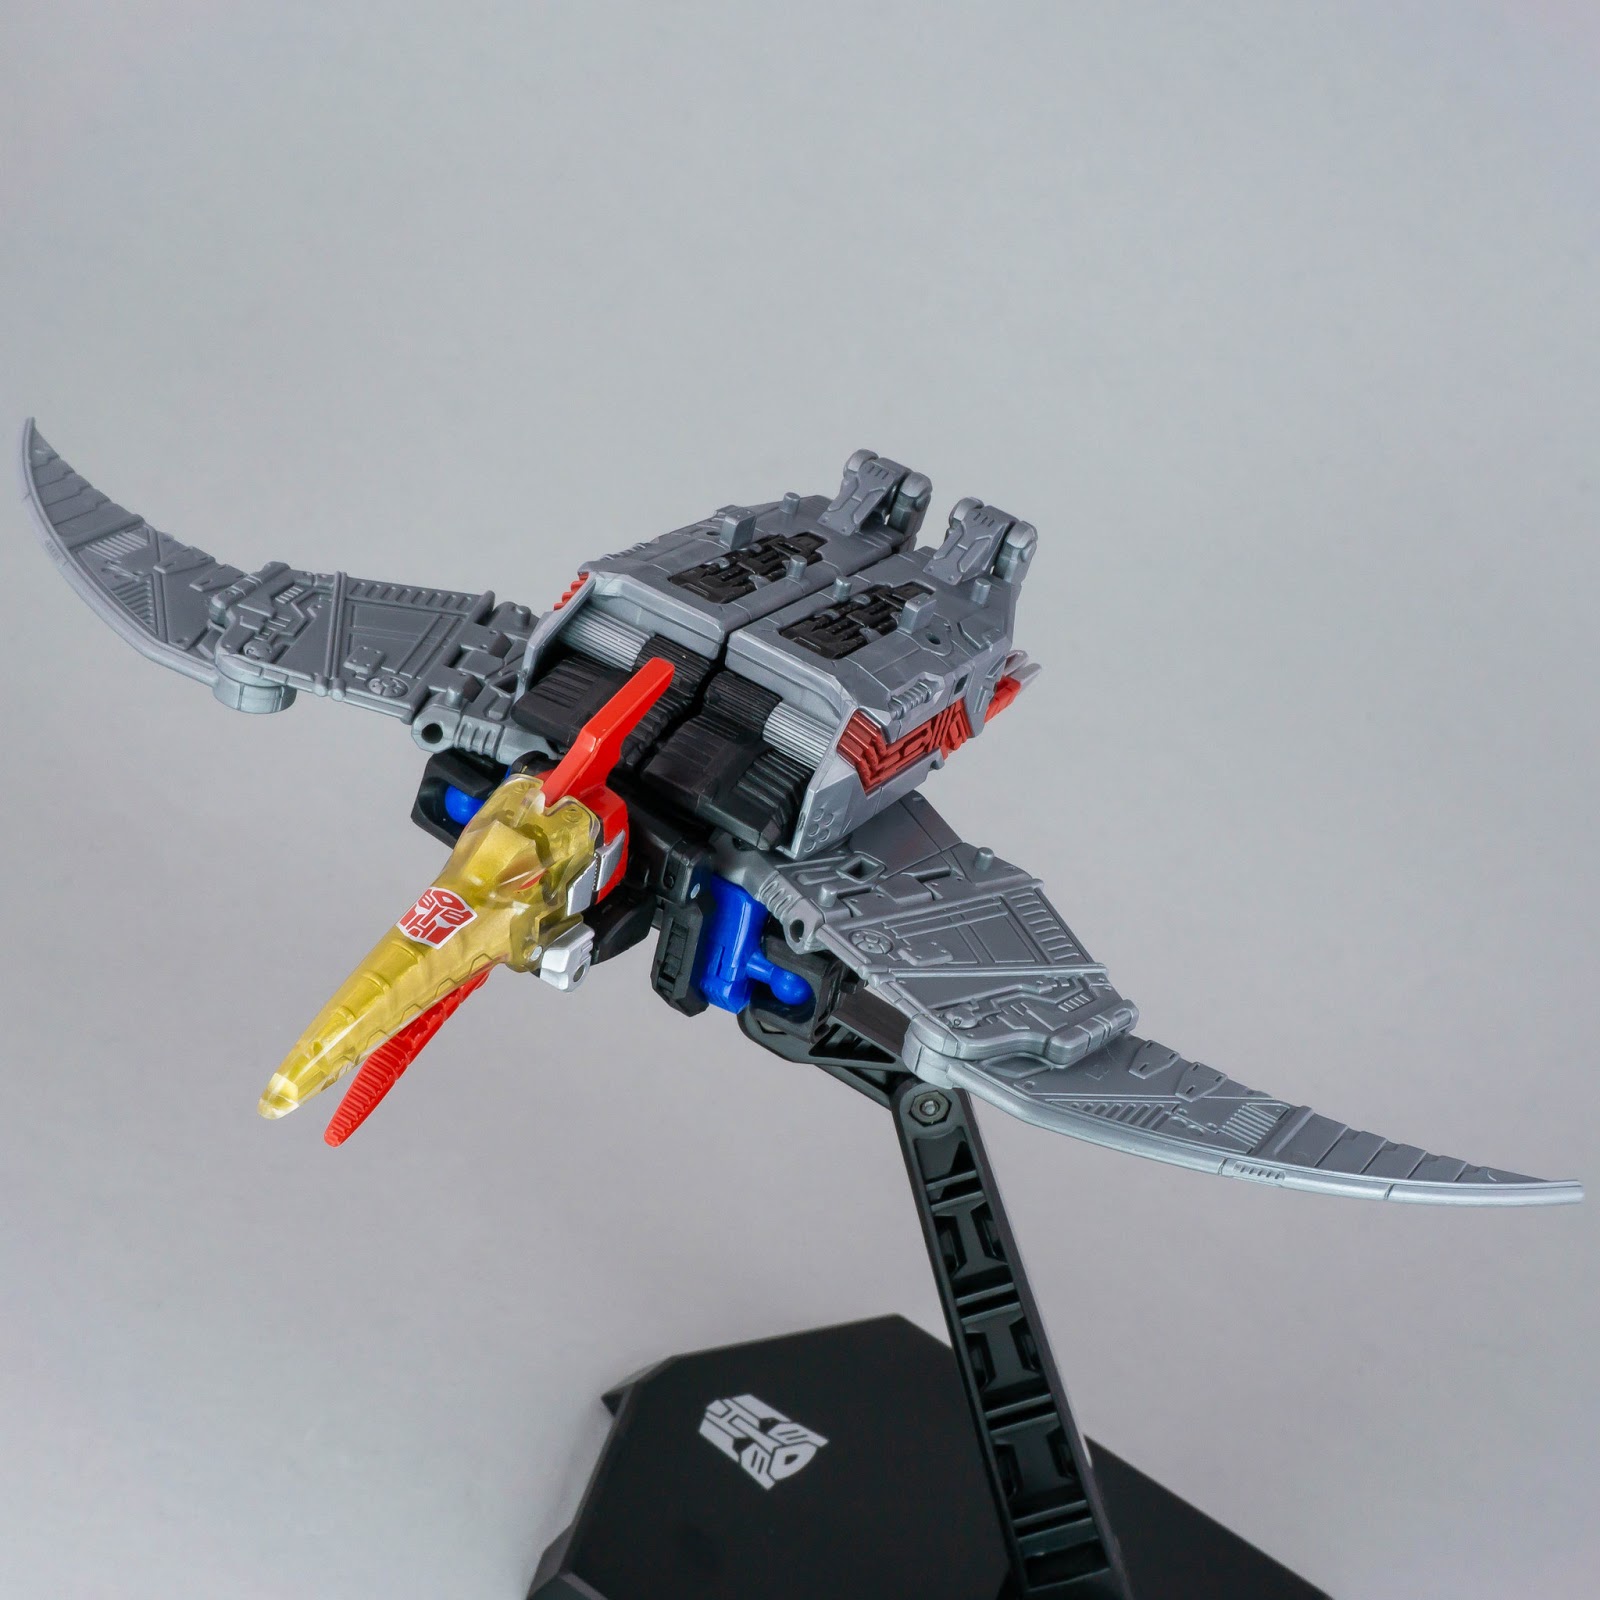 Transformers Power of the Primes Swoop Pteranodon mode in flight